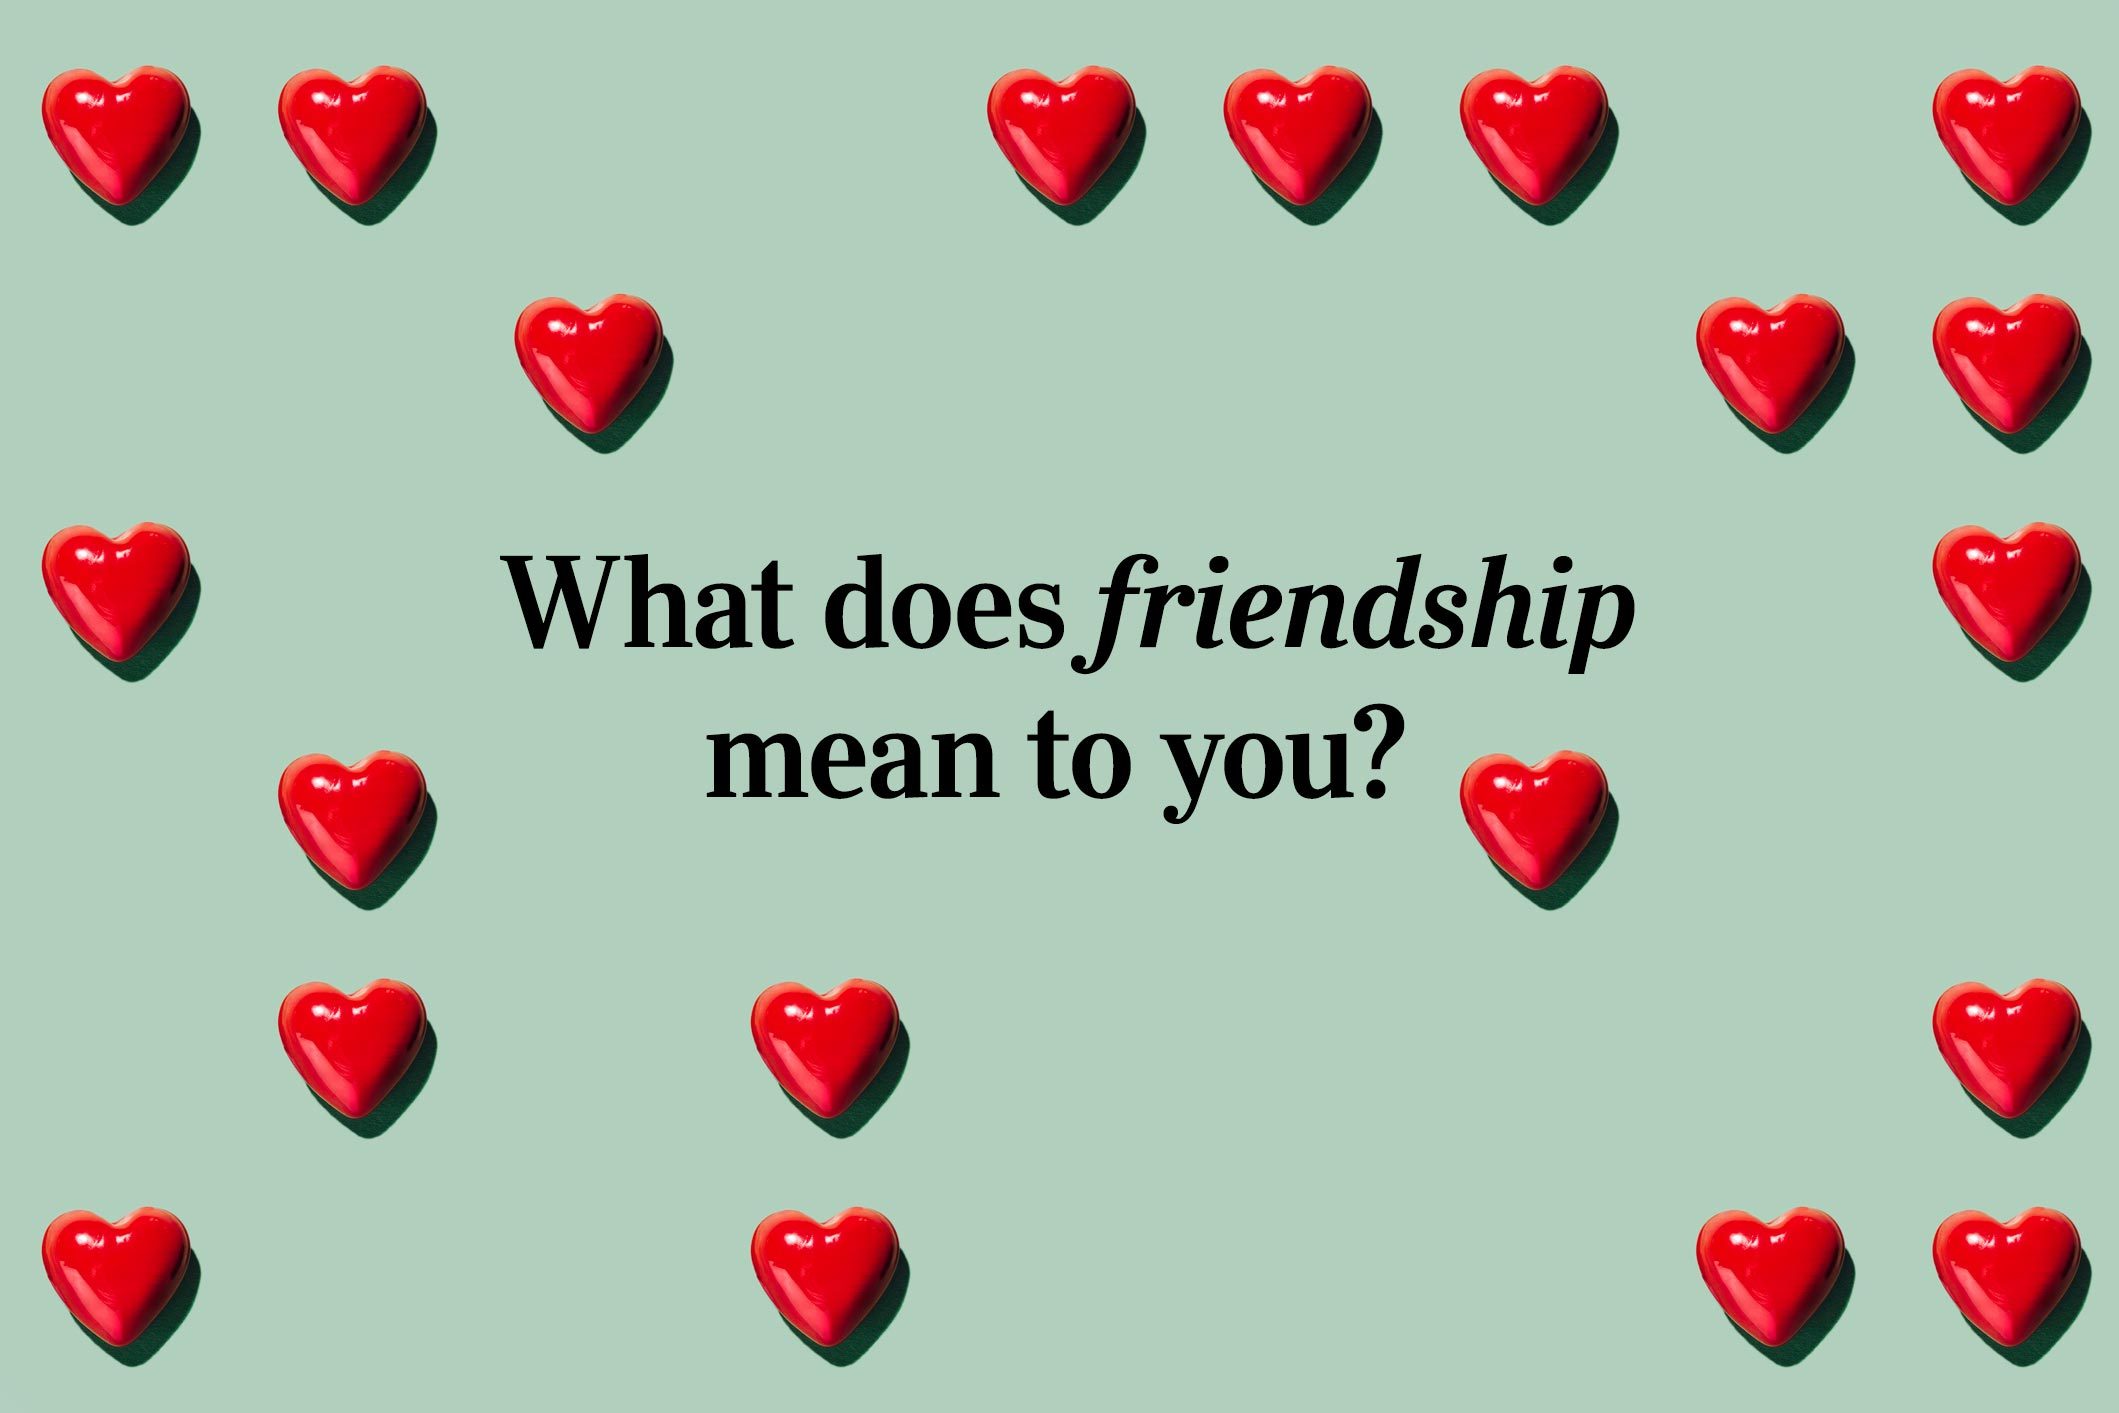 <p>Many romantic relationships start off as friendships. So, what does <a href="https://www.rd.com/list/lifelong-friendships/">friendship</a> mean to you?</p>